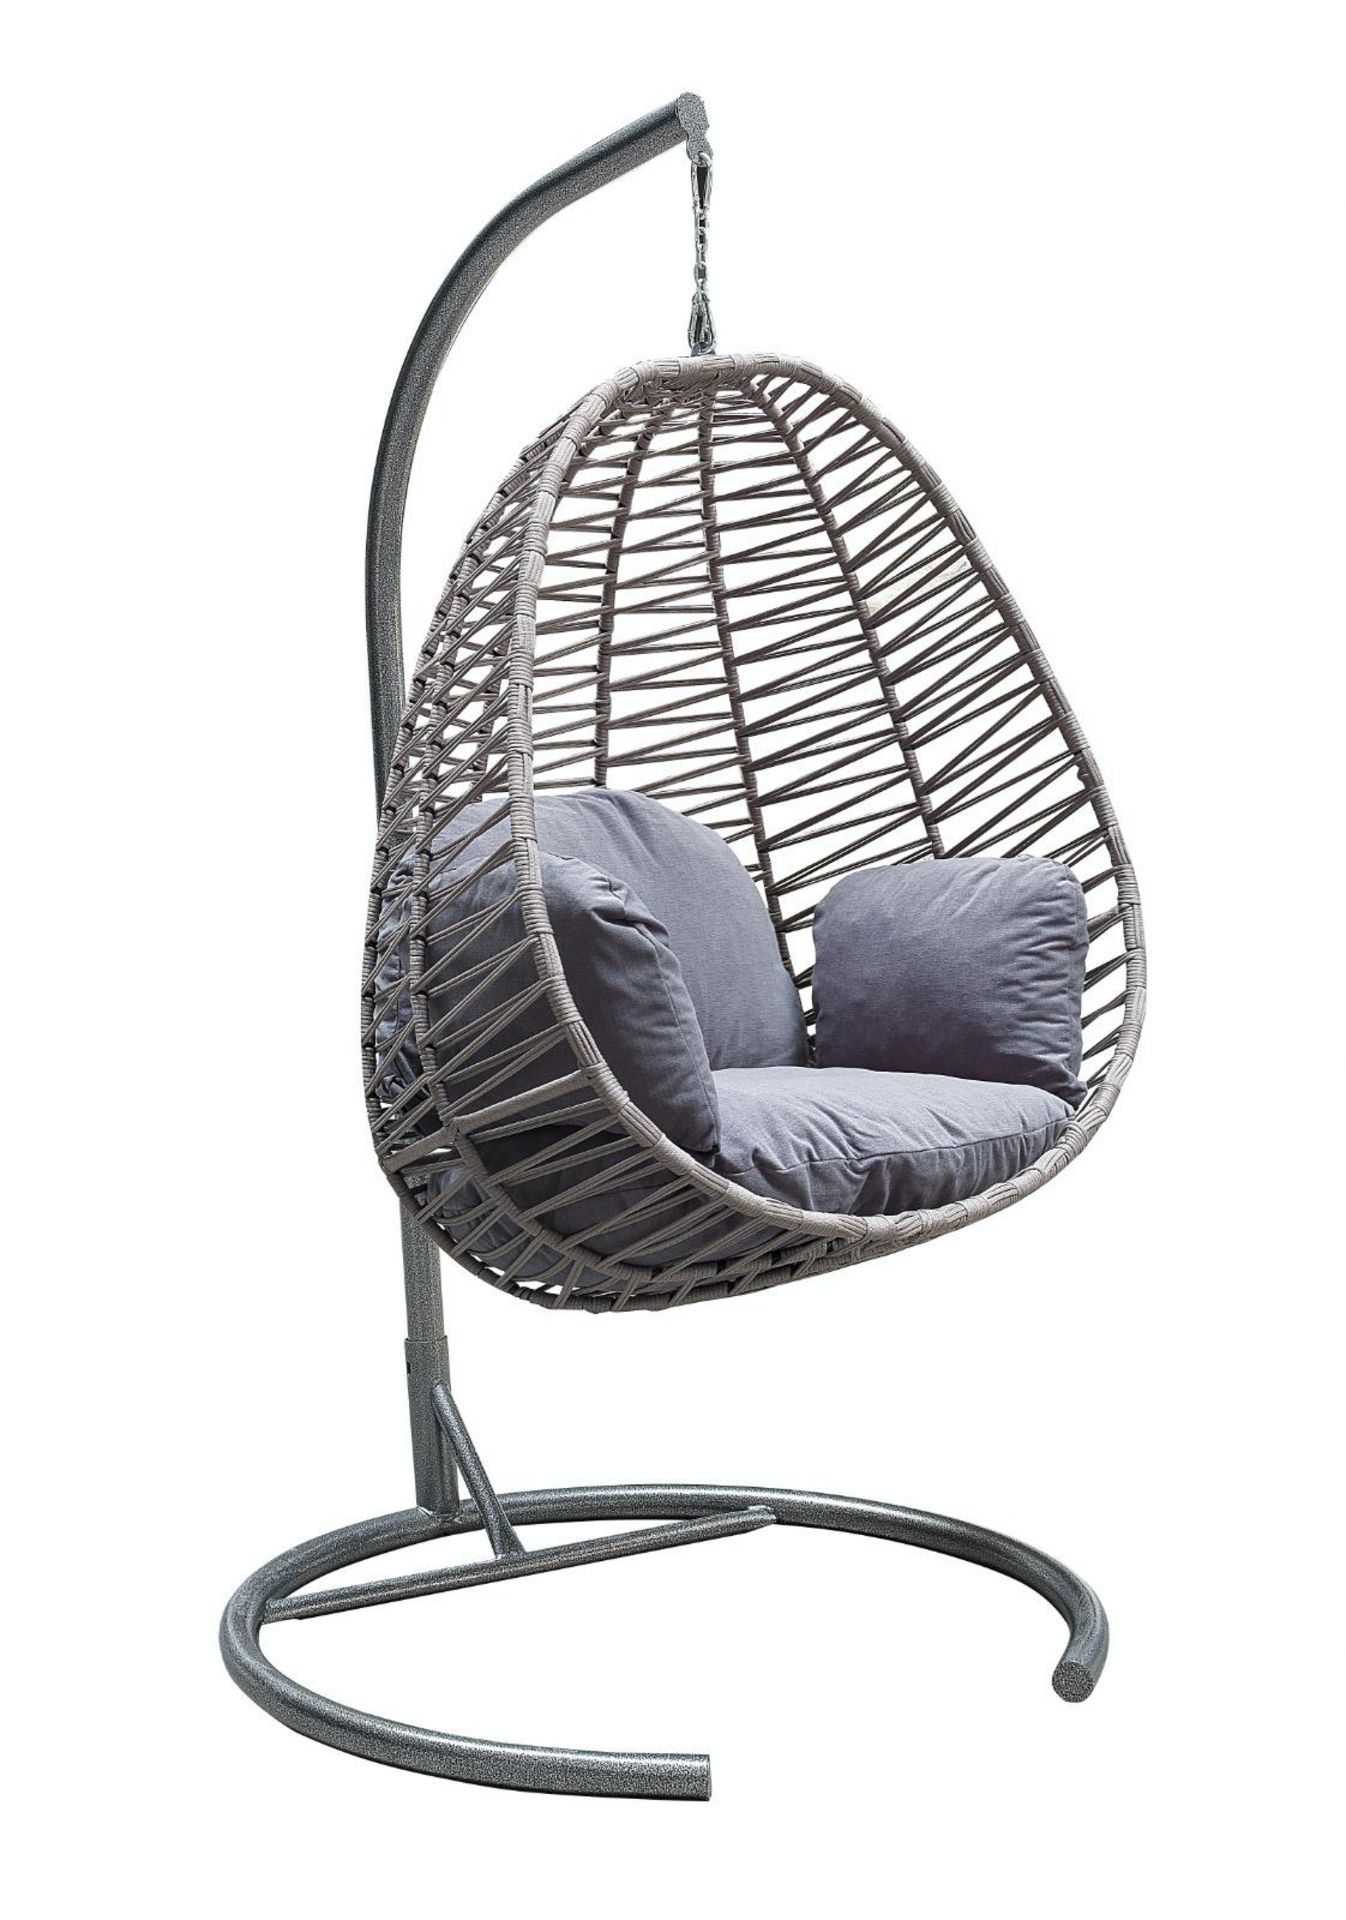 New Light Grey Luxury Weaved Hanging Egg With Cushion (Similar Chairs £250 to £400)